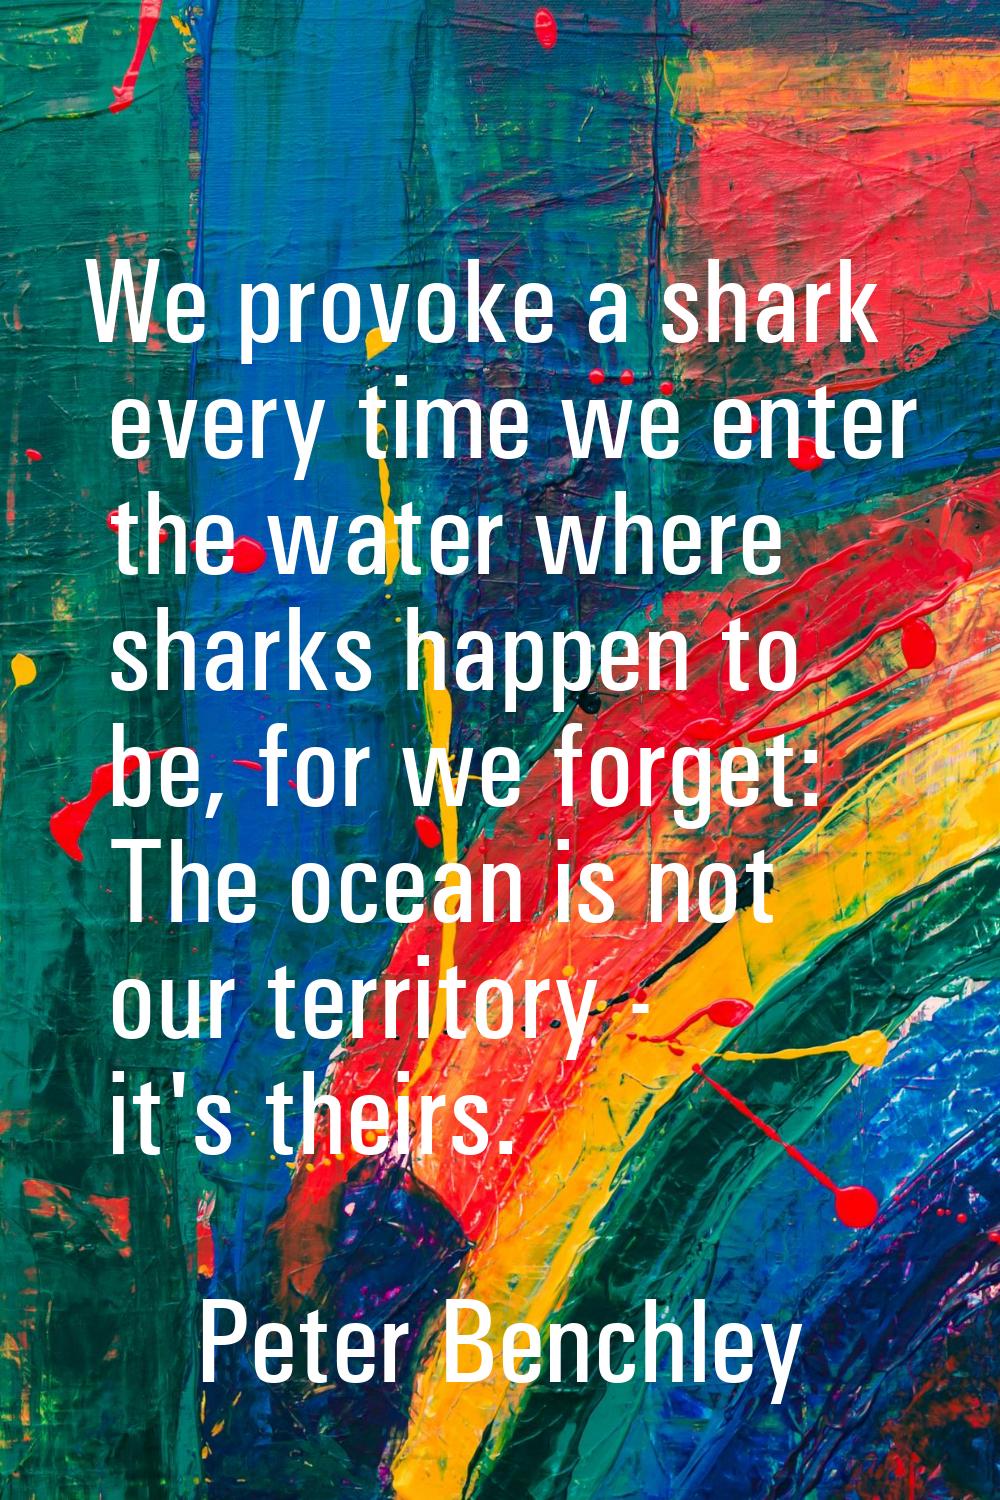 We provoke a shark every time we enter the water where sharks happen to be, for we forget: The ocea